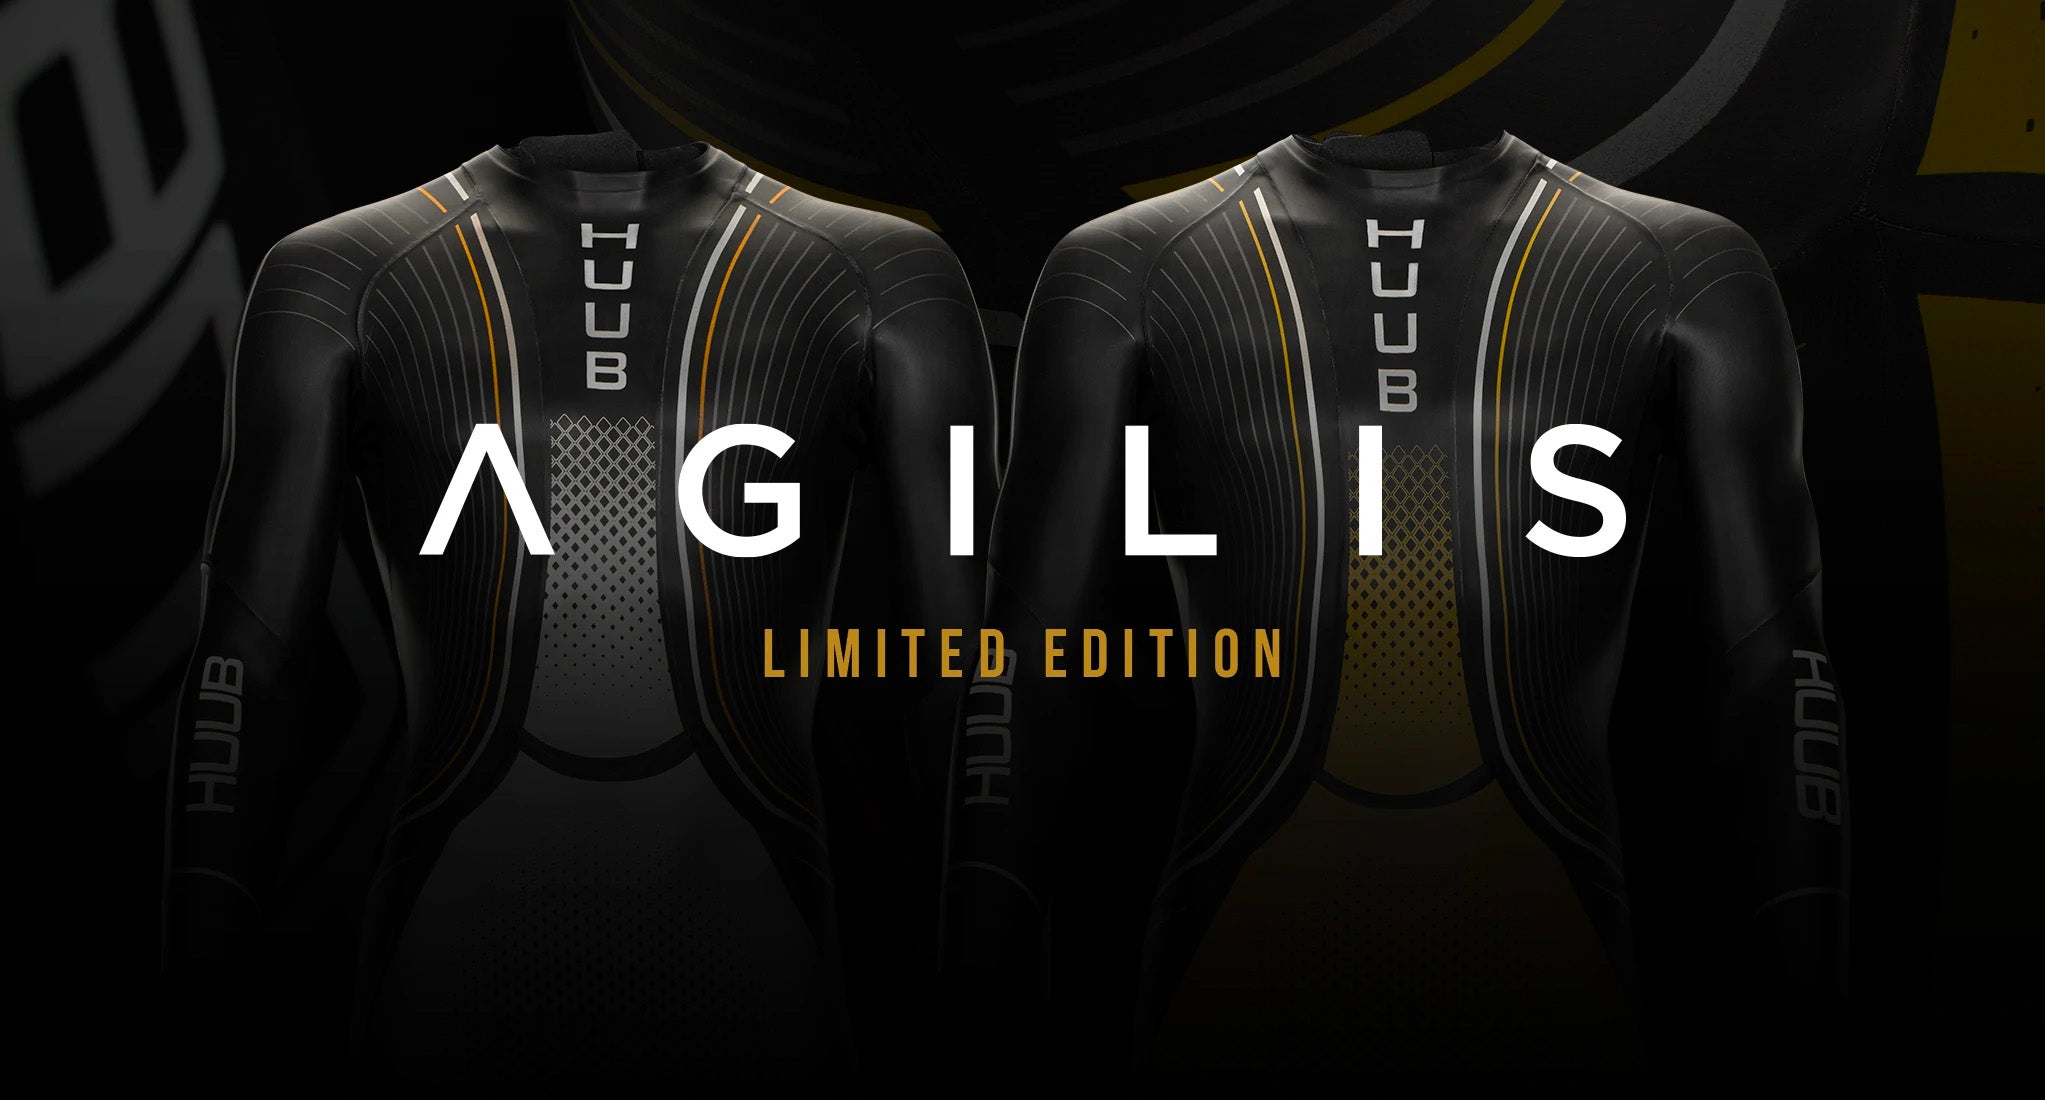 Limited edition Agilis Wetsuits celebrate Alistair and Jonny Brownlee's Olympic achievements